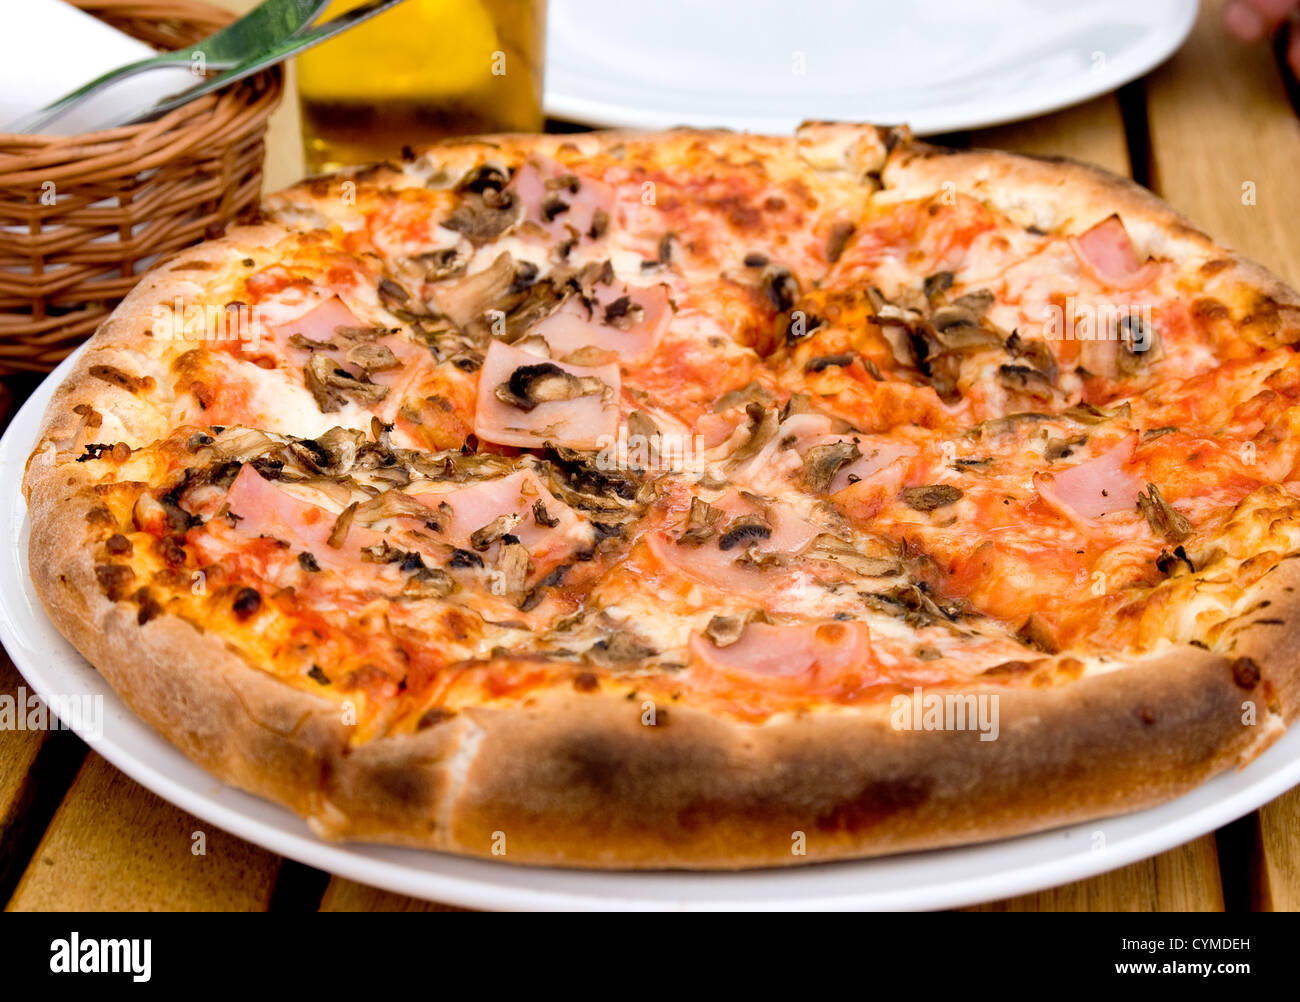 pizza on the pizzeria table ready to eat Stock Photo